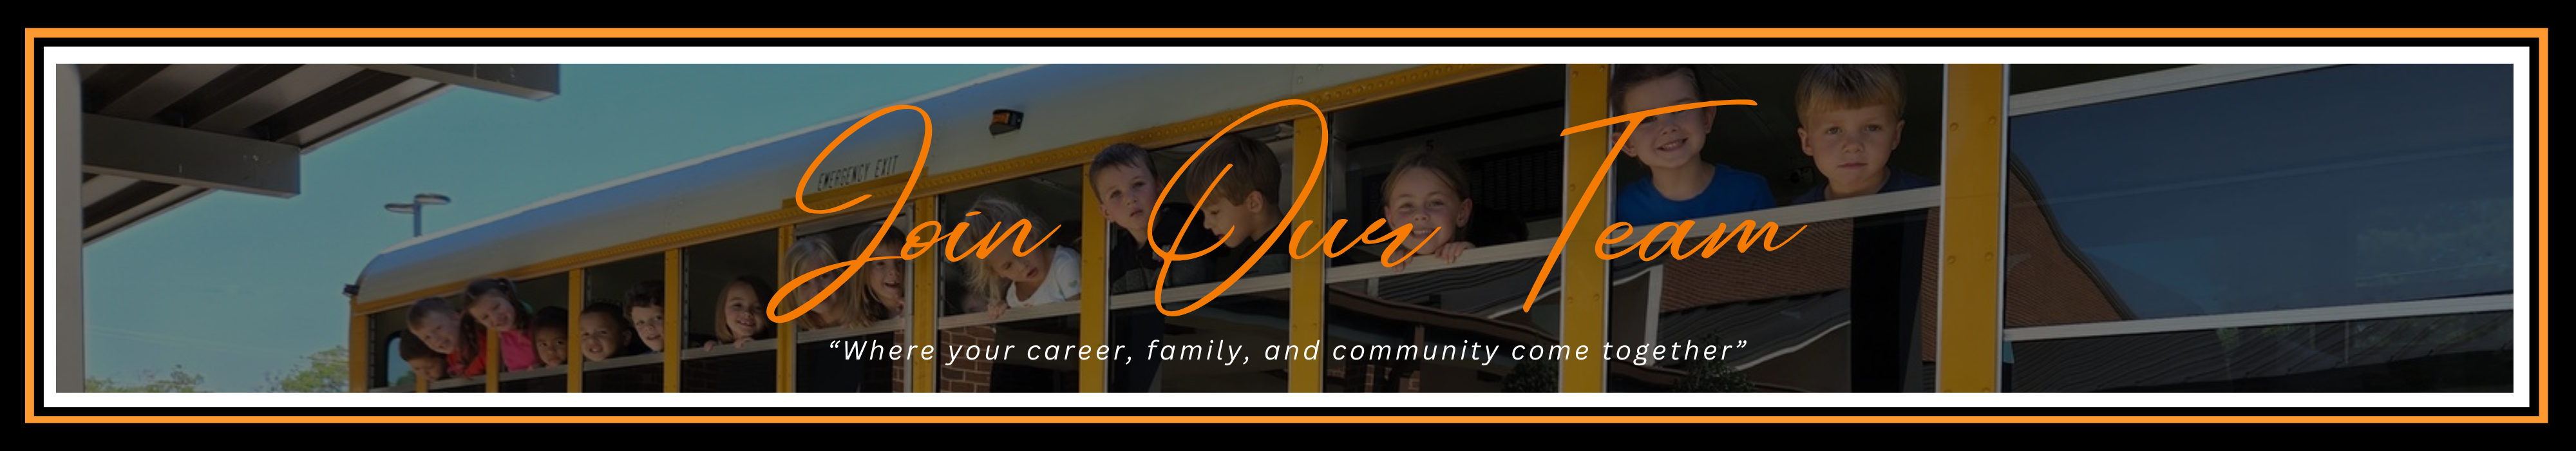 join our team where your career, family, and community come together